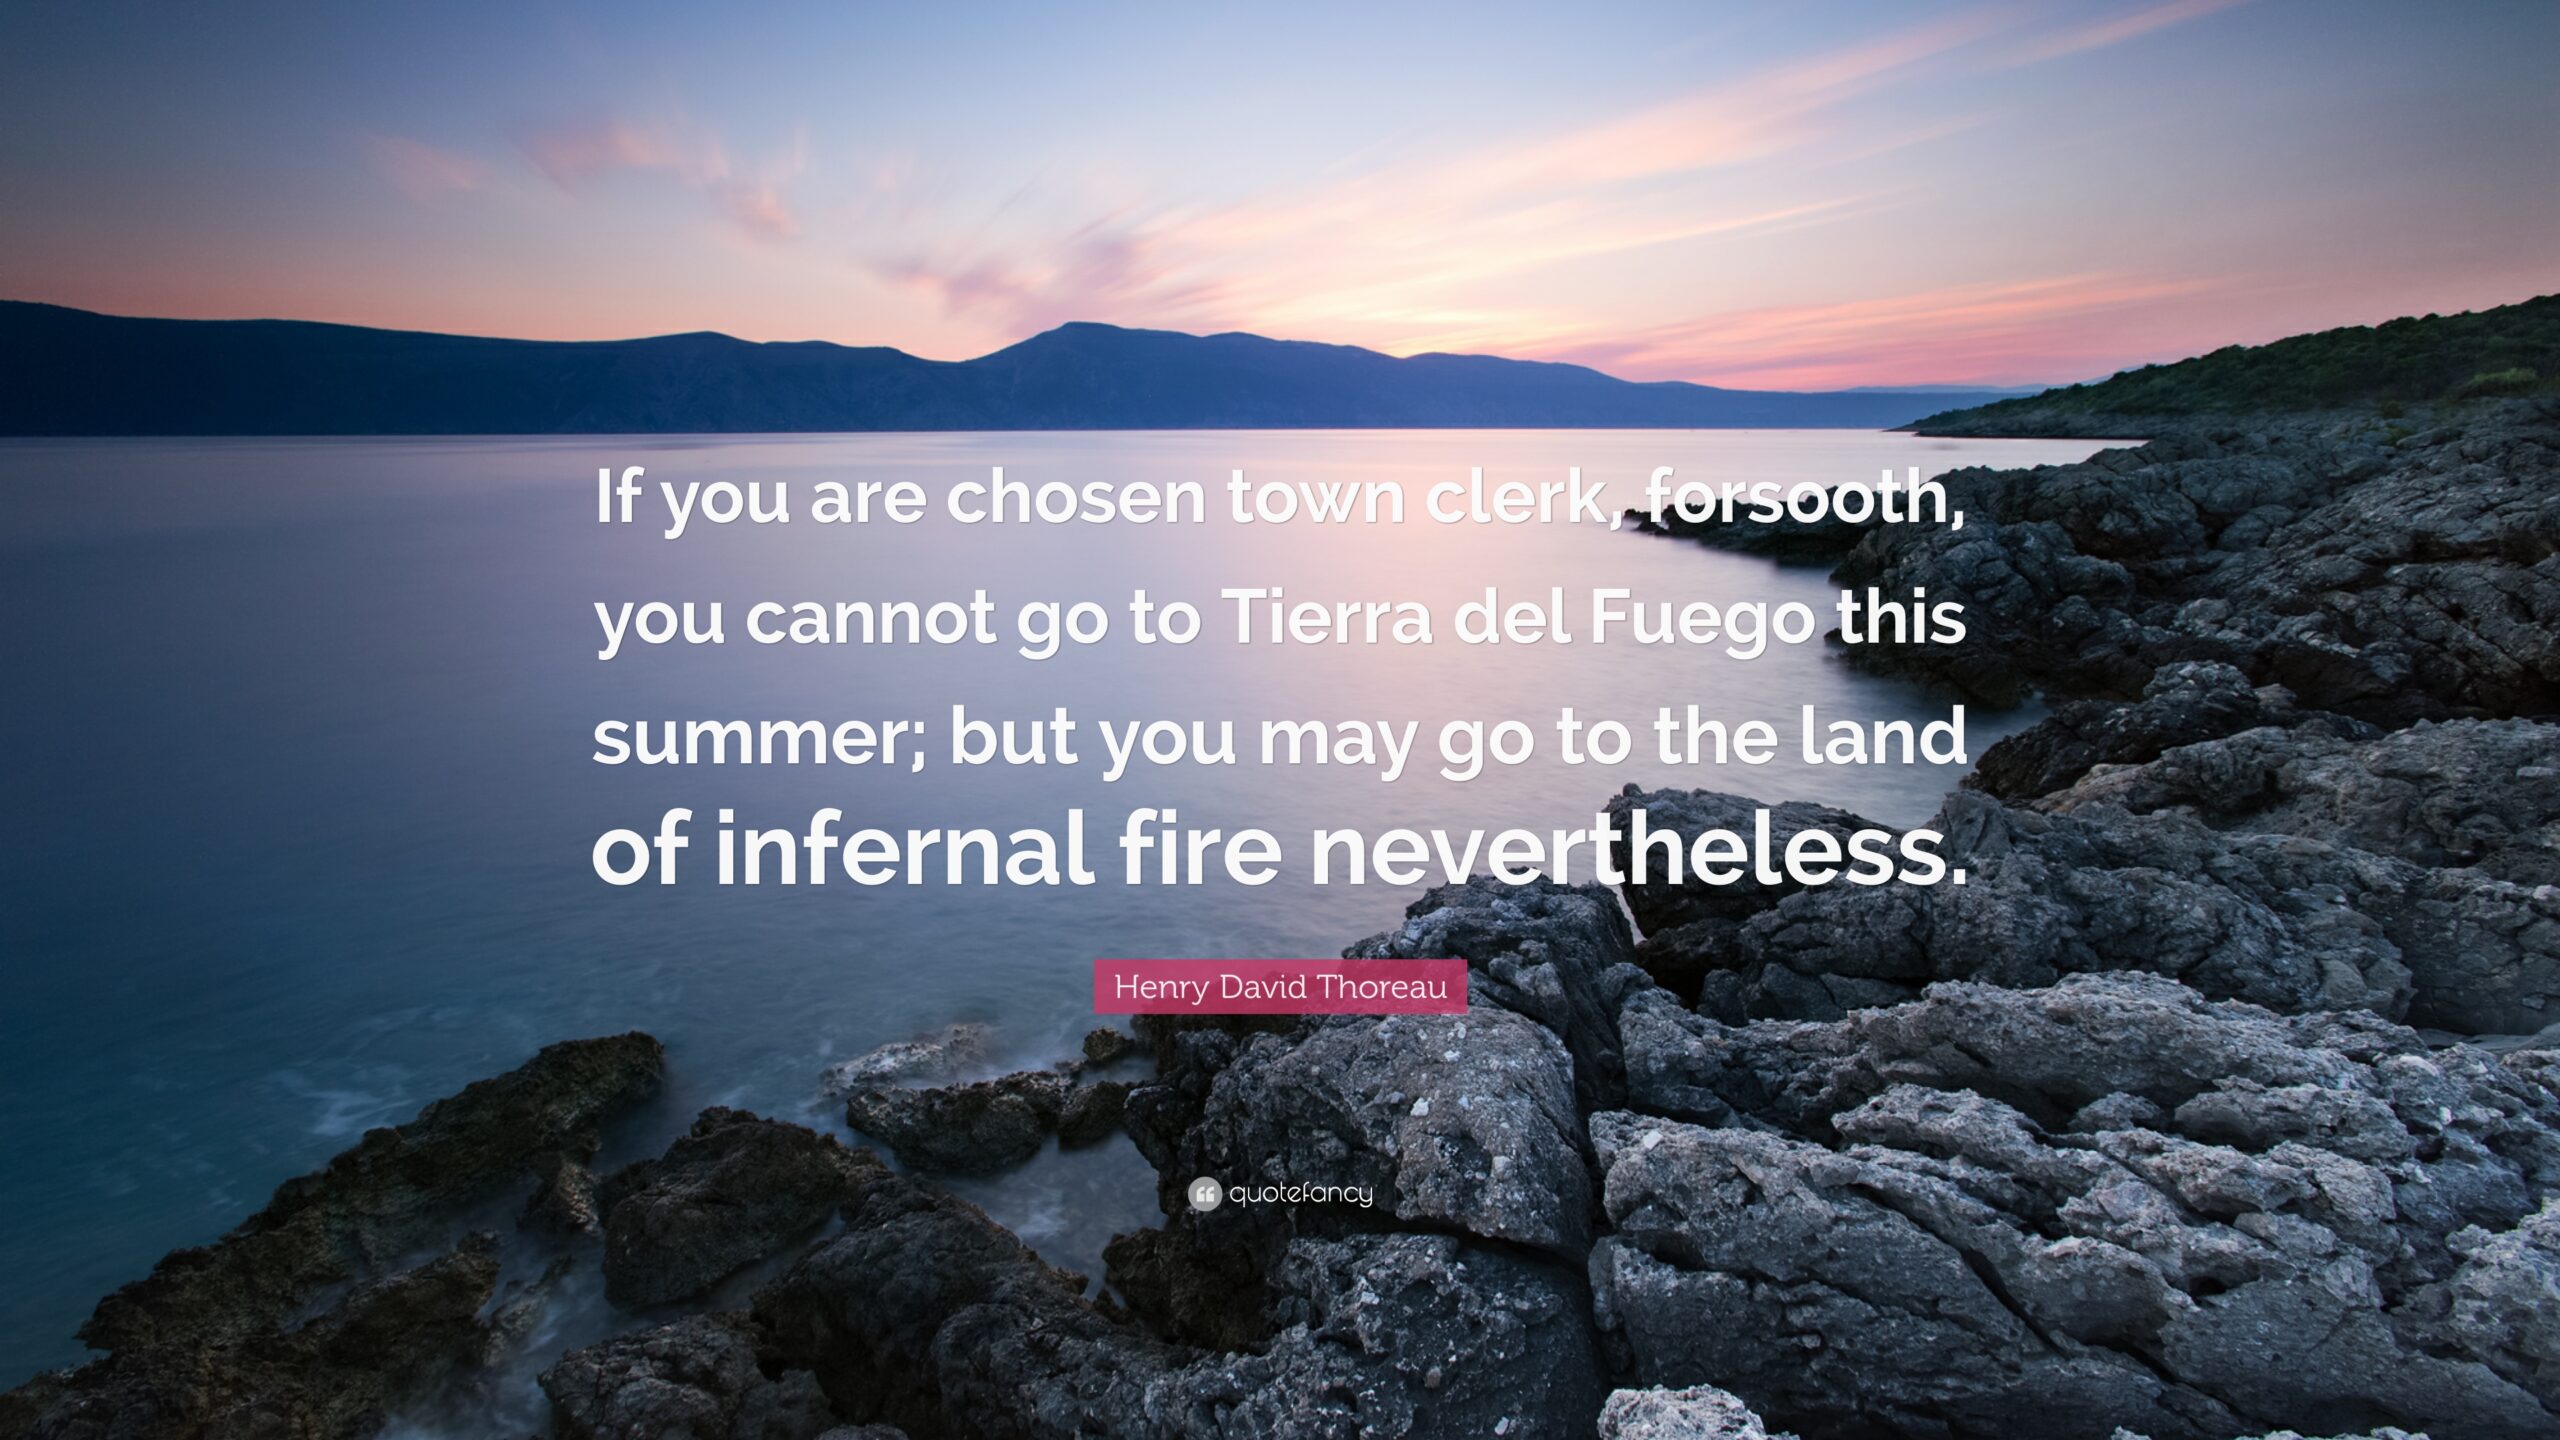 Henry David Thoreau Quote “If you are chosen town clerk, forsooth